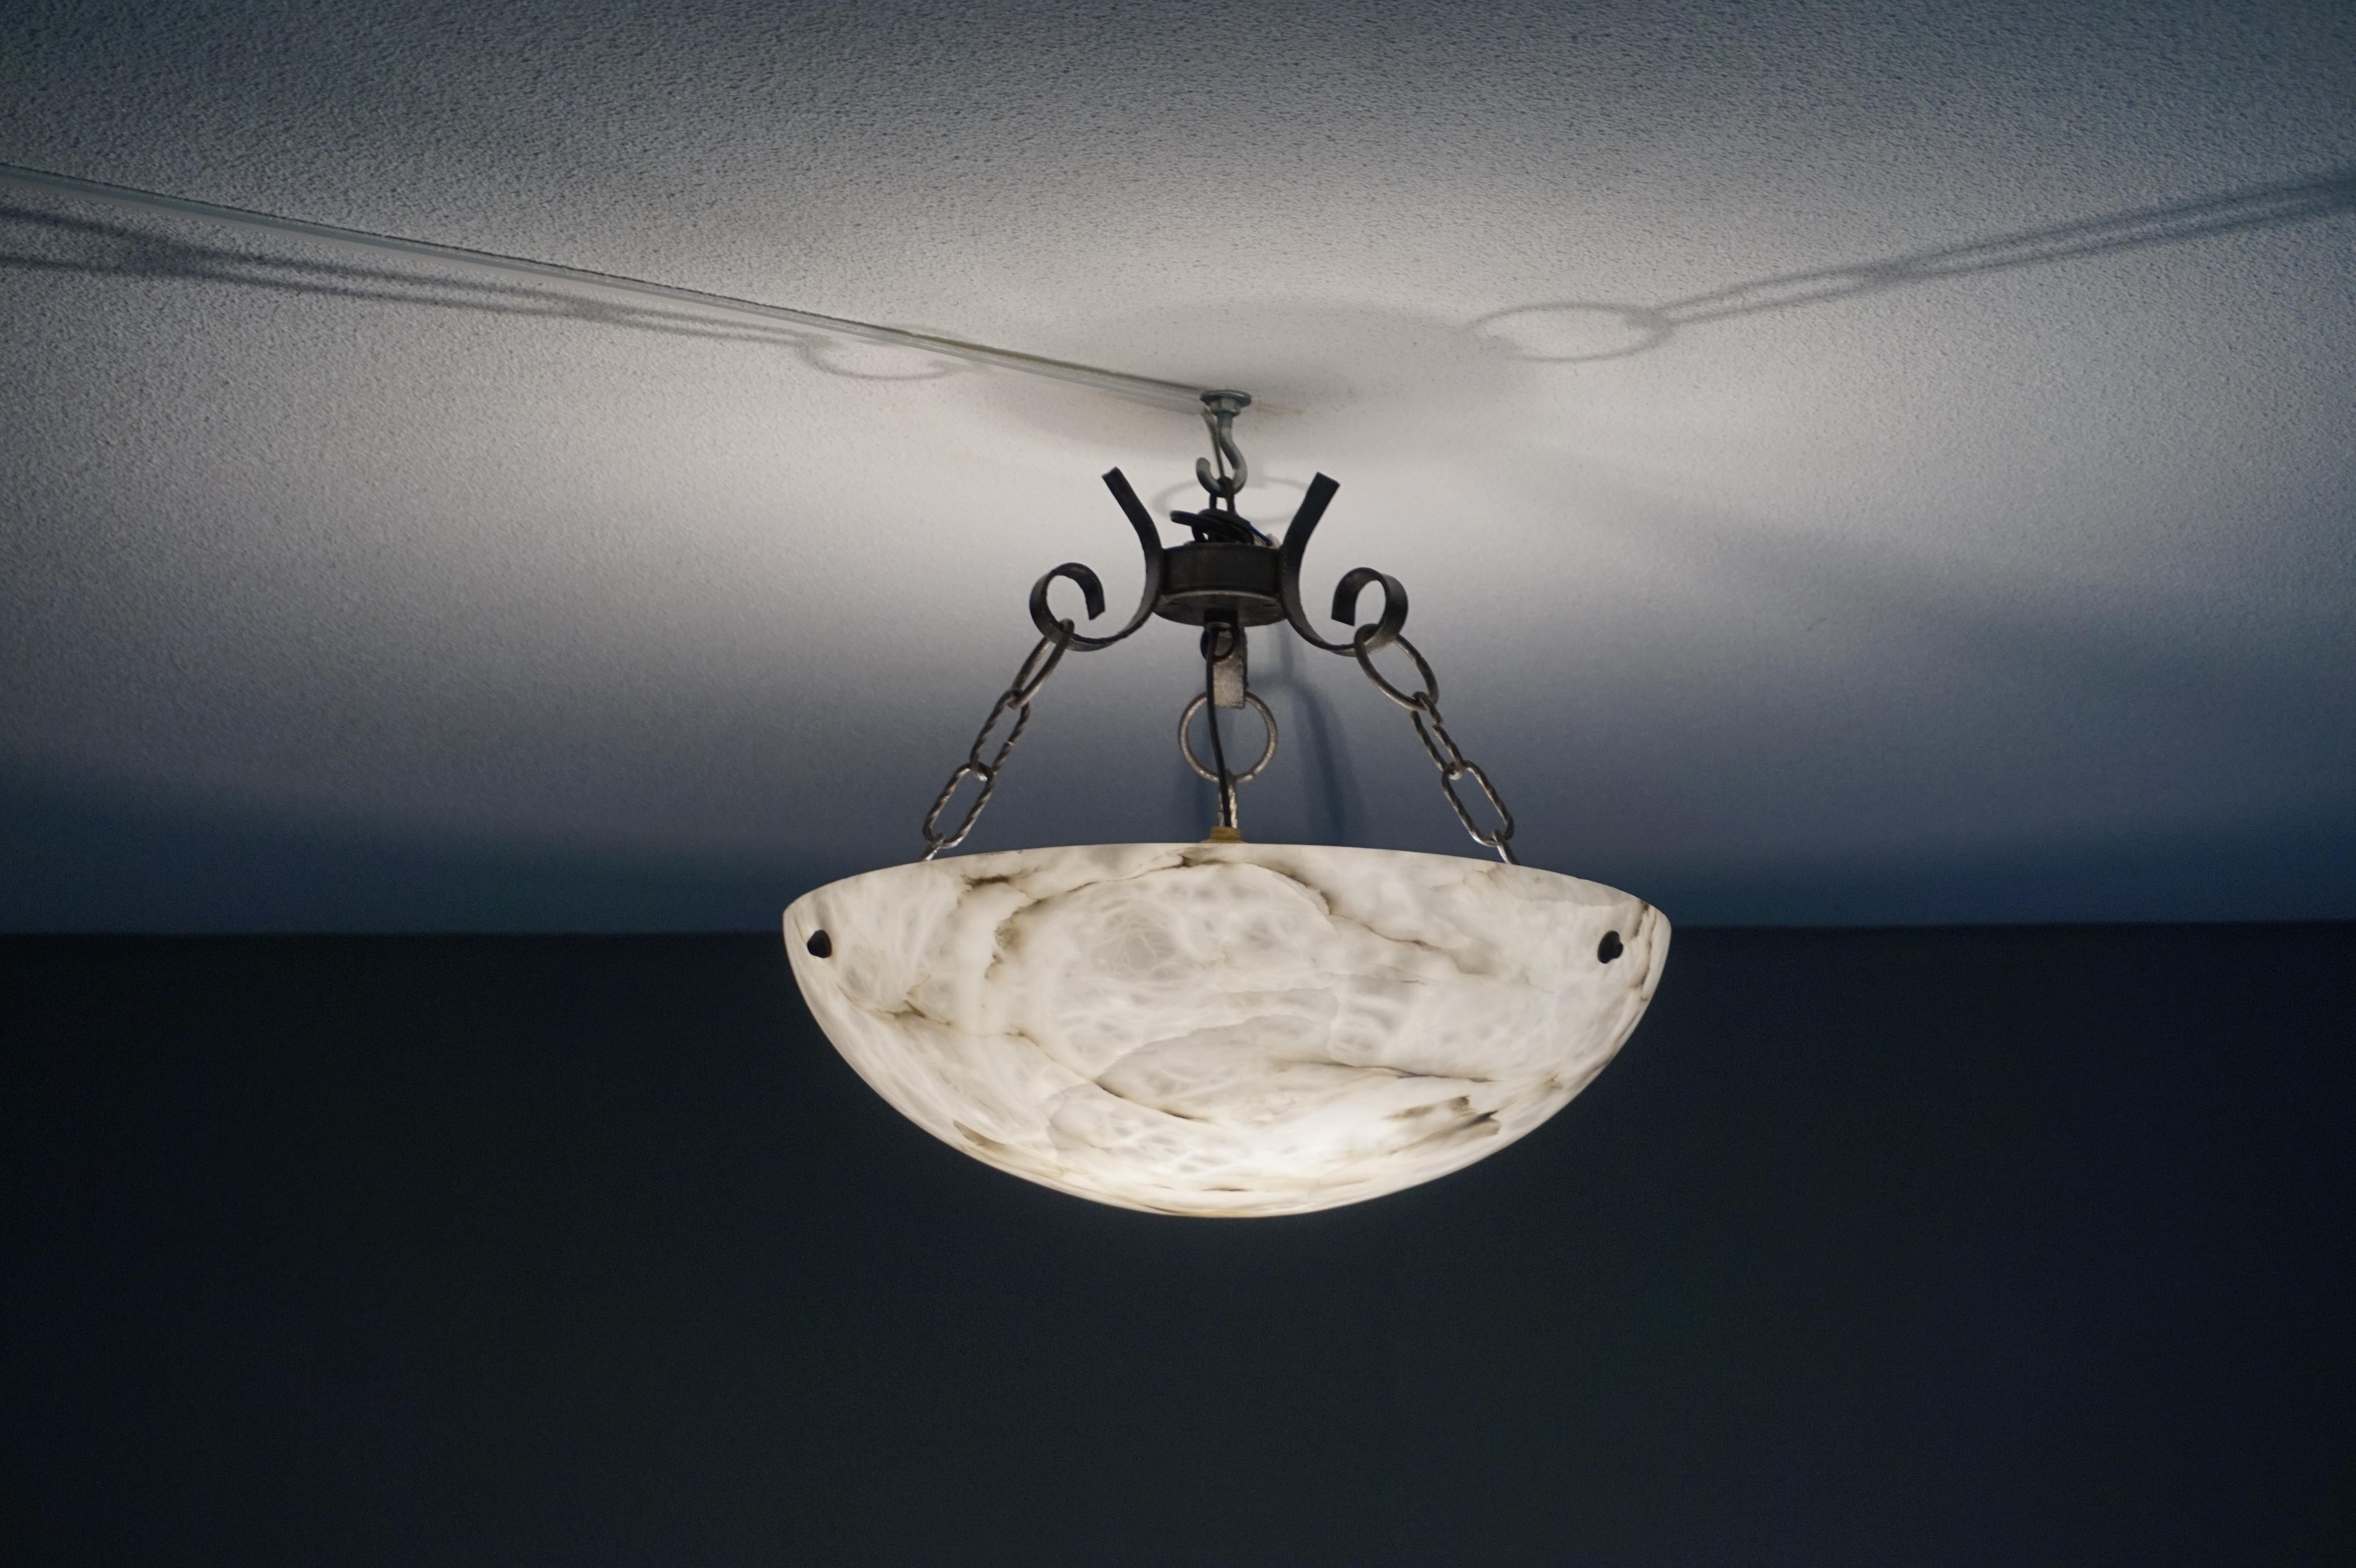 Wonderful shape and condition Art Deco light fixture.

If you are looking for a stylish and beautiful Art Deco light fixture to grace your living space then this Dual purpose ceiling lamp could be yours to enjoy soon. Thanks to the practical size